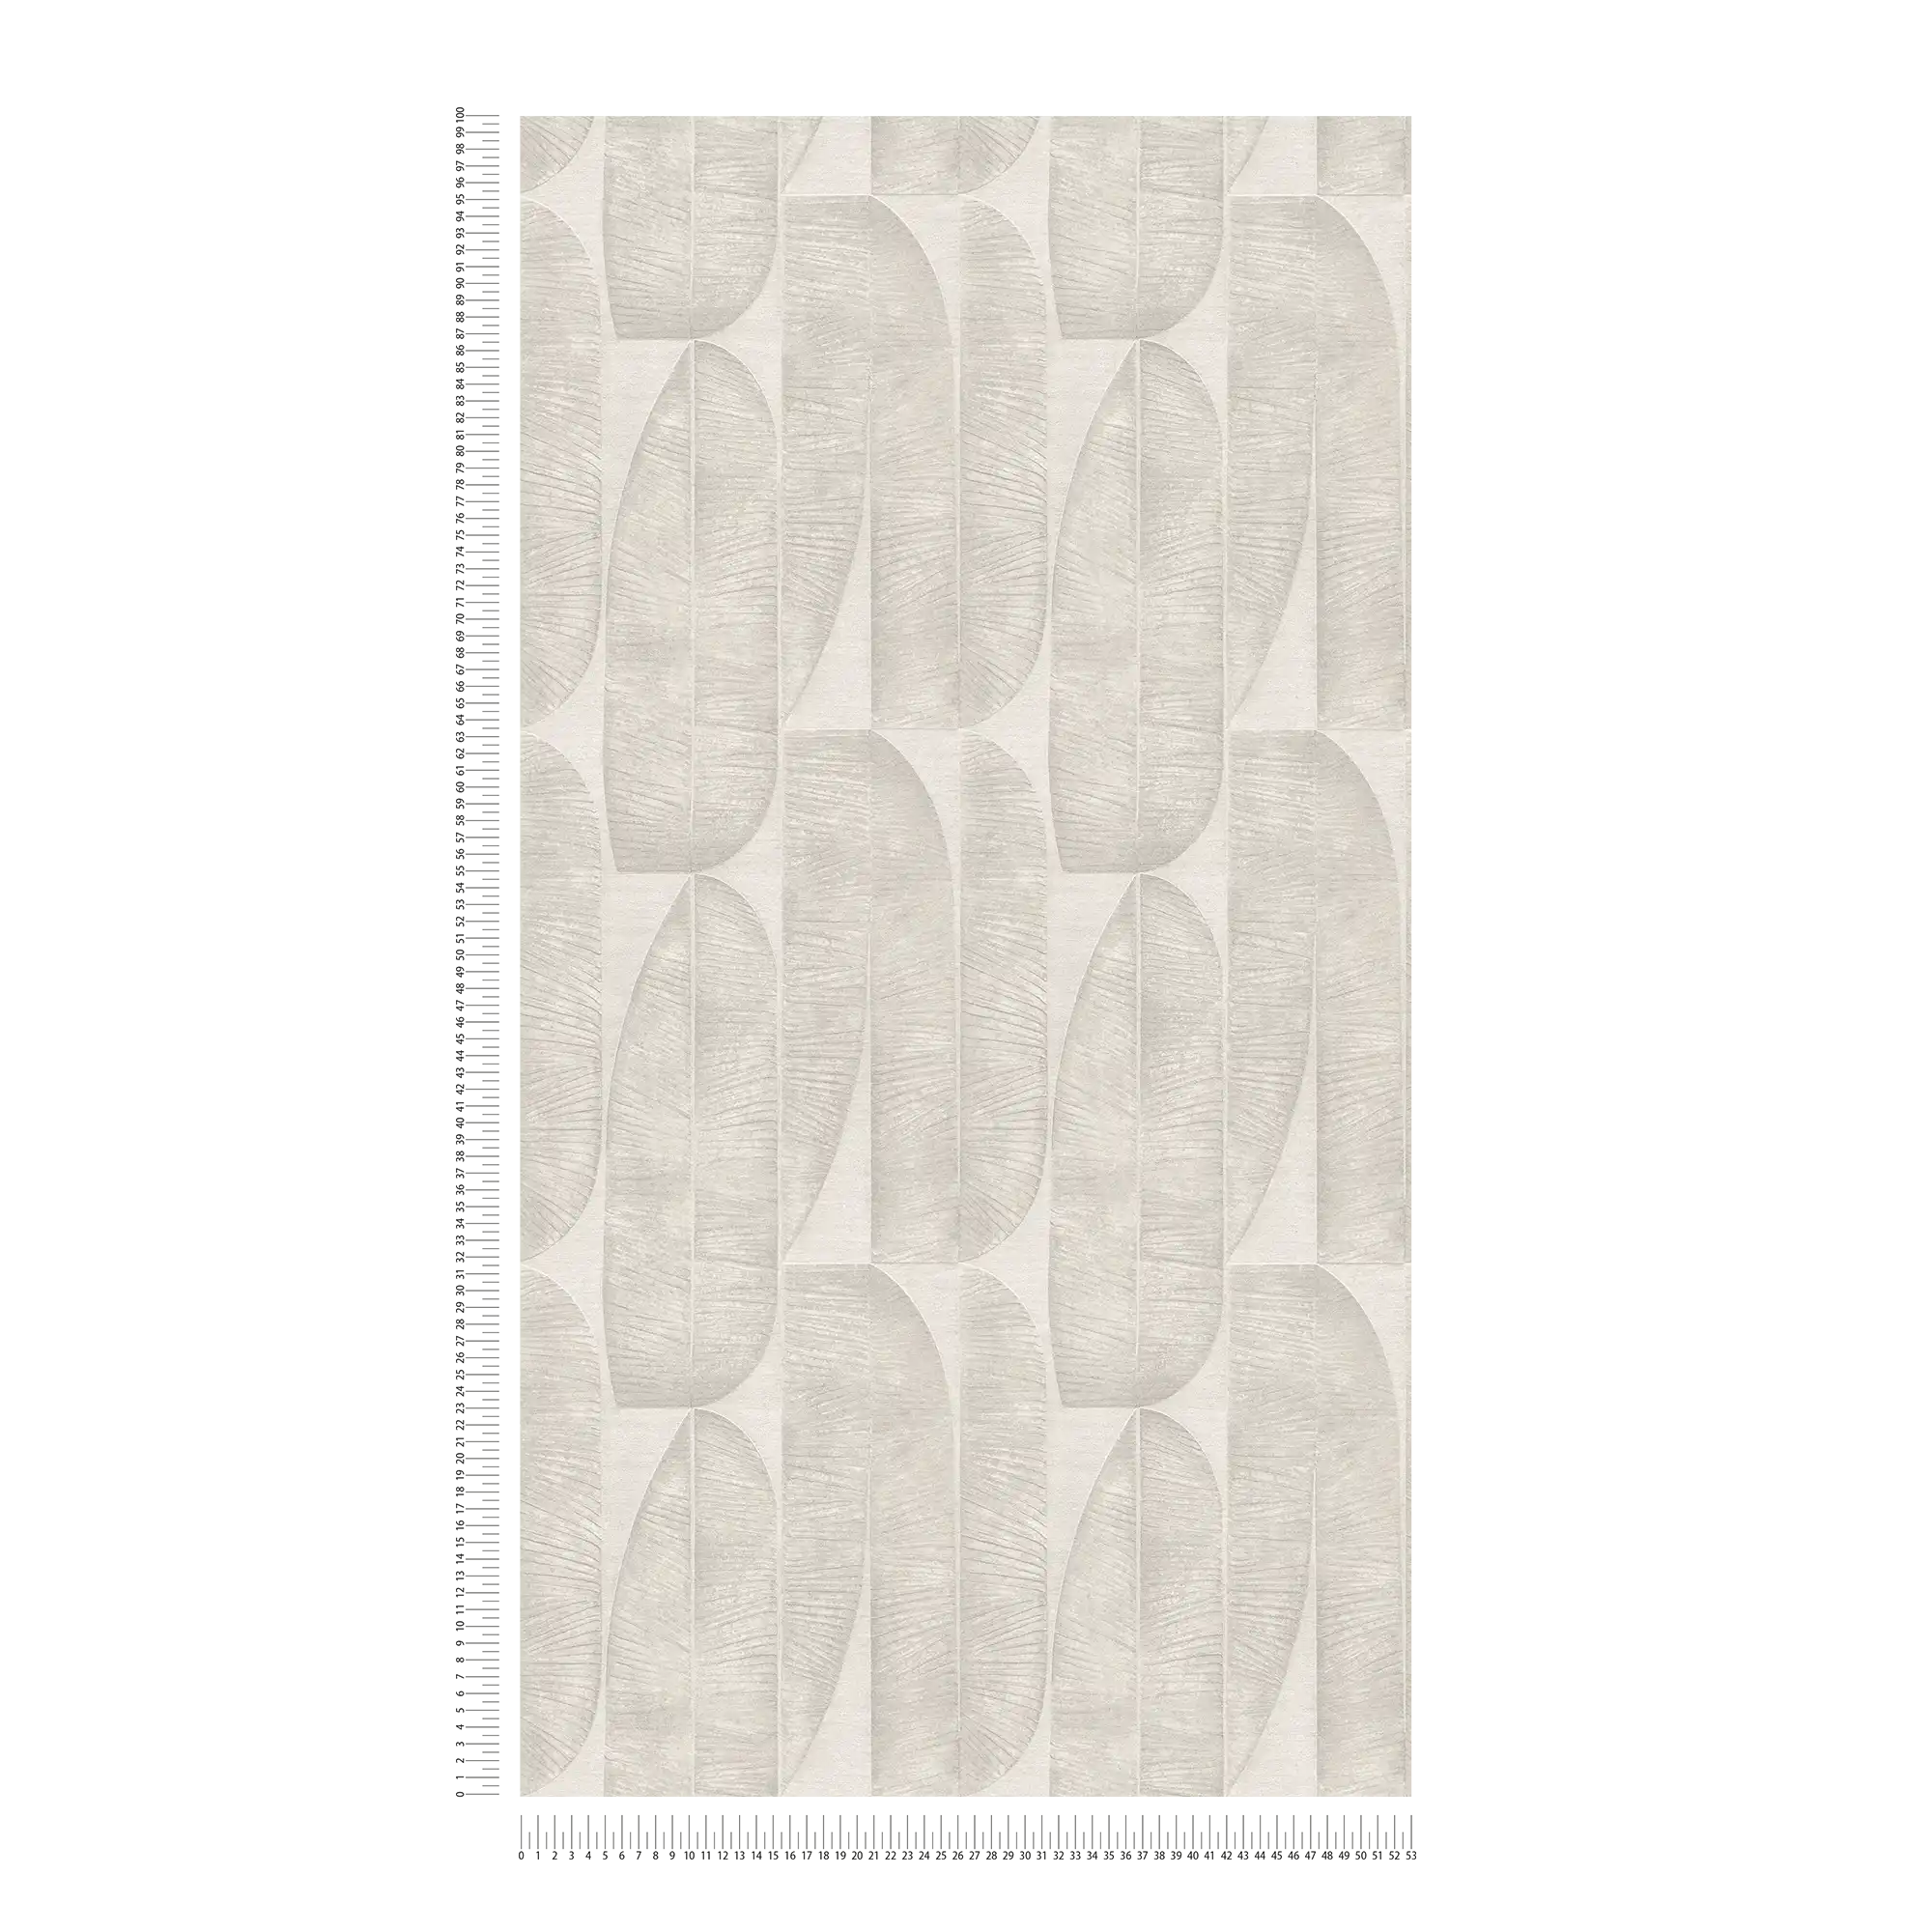             Non-woven wallpaper with geometric floral pattern - grey, beige
        